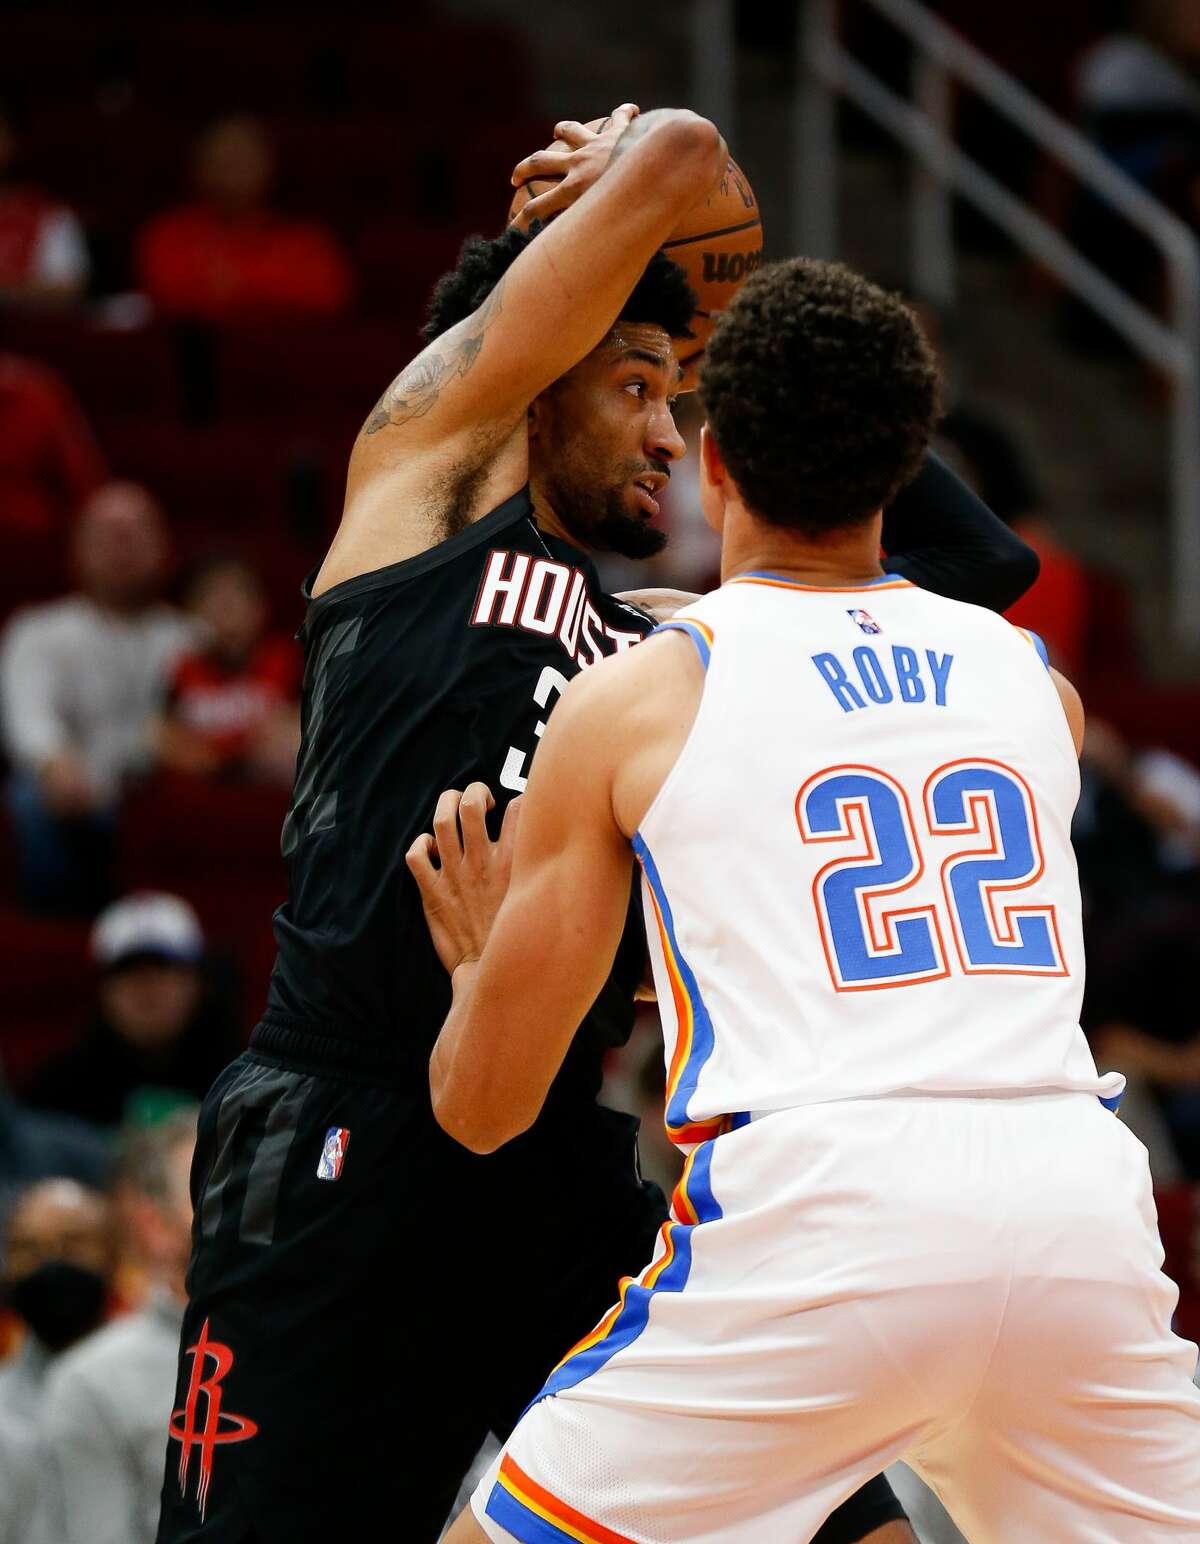 Houston Rockets center Christian Wood (35) shields the ball away from Oklahoma City Thunder forward Isaiah Roby (22) as he looks for an open teammate during the first quarter of an NBA game at Toyota Center on Monday, Nov. 29, 2021, in Houston.